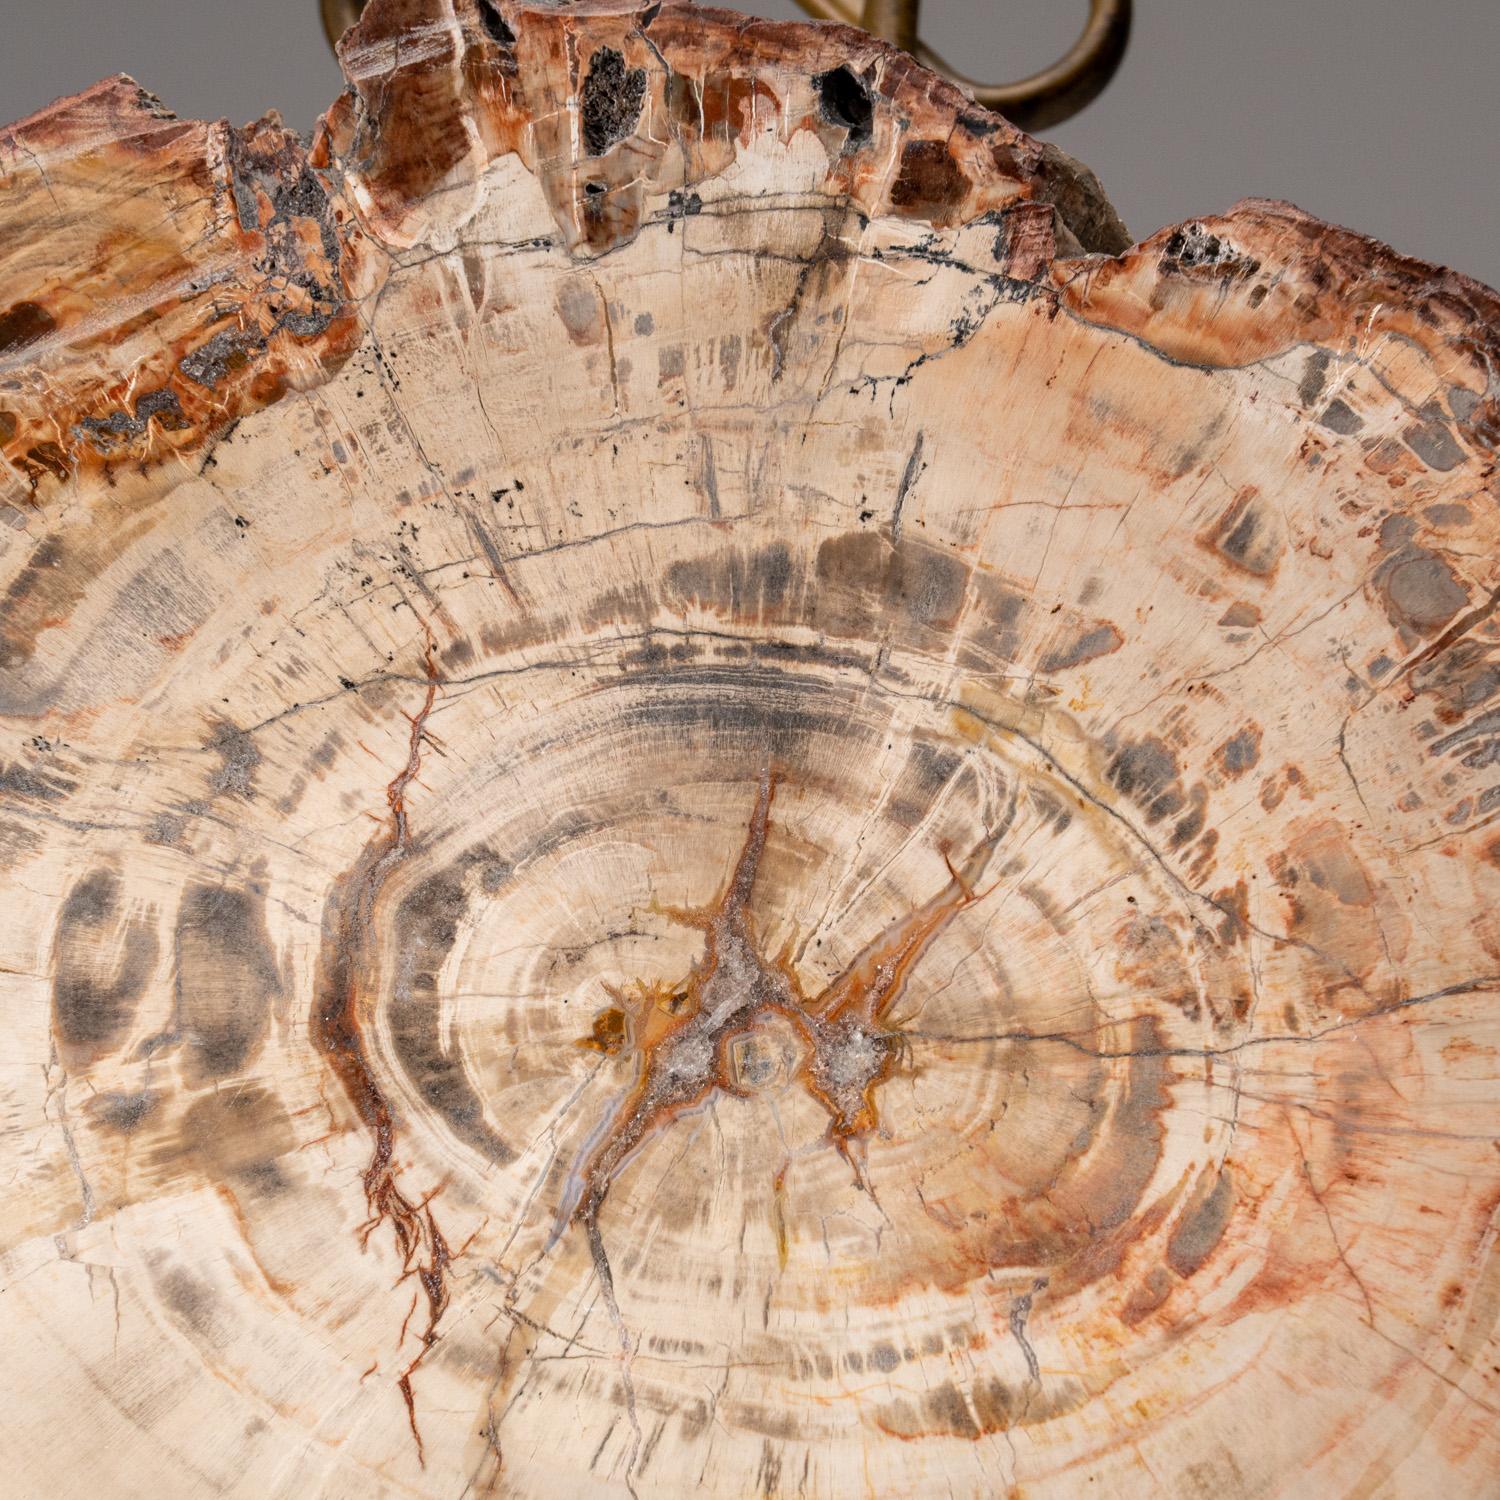 This beautiful hand polished petrified wood slice is sourced from Madagascar and comes with an elegant metal display stand. It has an amazing pattern with vibrant hues of brown, yellow, and orange. Fossilized Petrified Wood, which is also known as